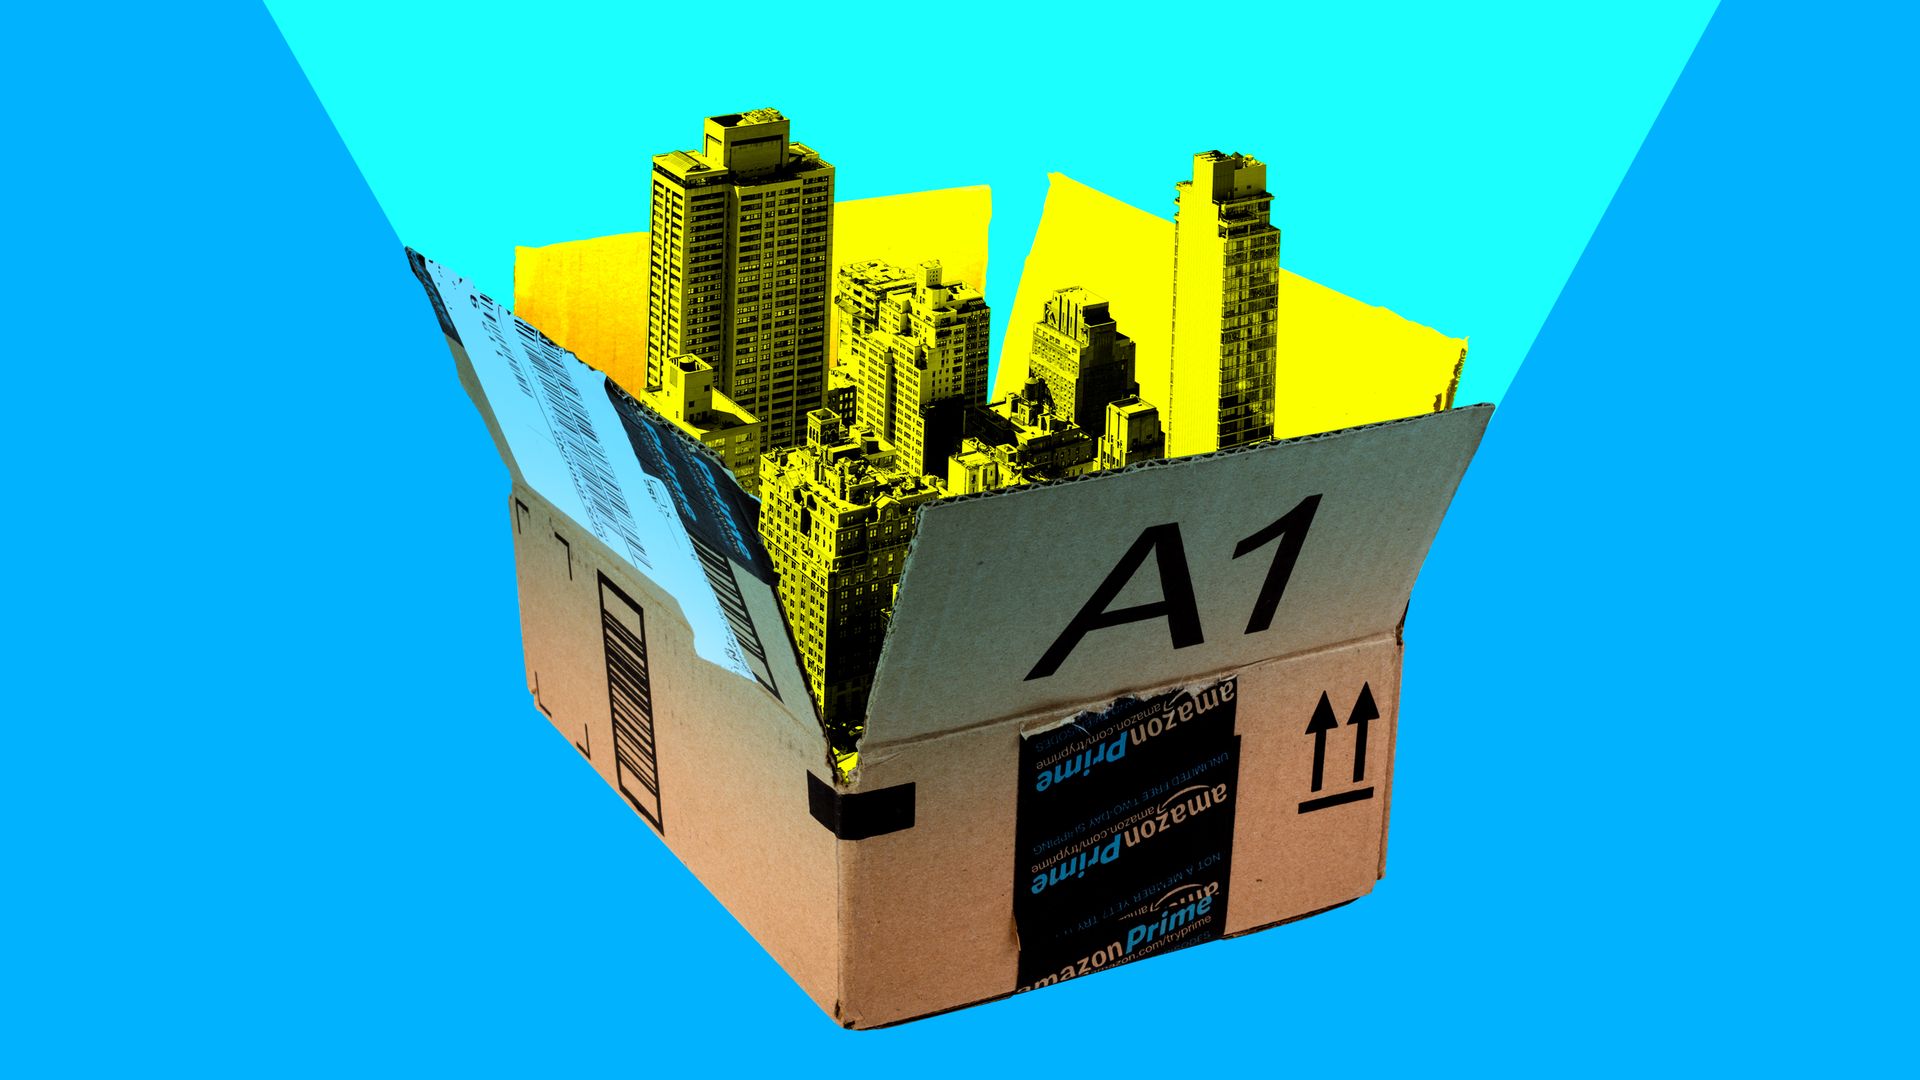 In this illustration, New York city skyscrapers peek out of an open Amazon box